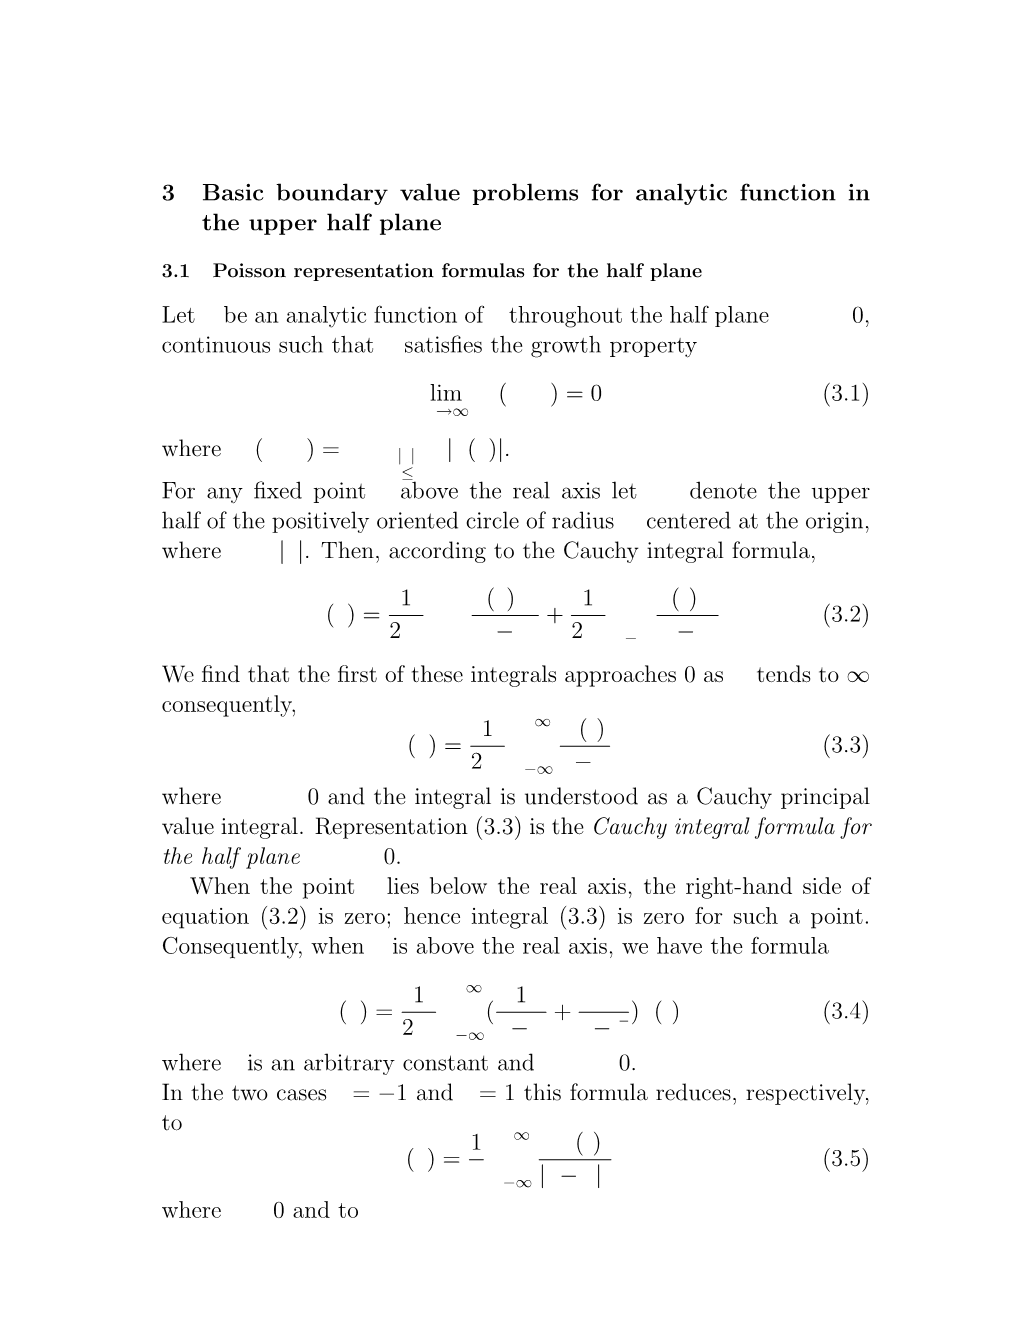 Basic Complex Boundary Value Problems in the Upper Half Plane